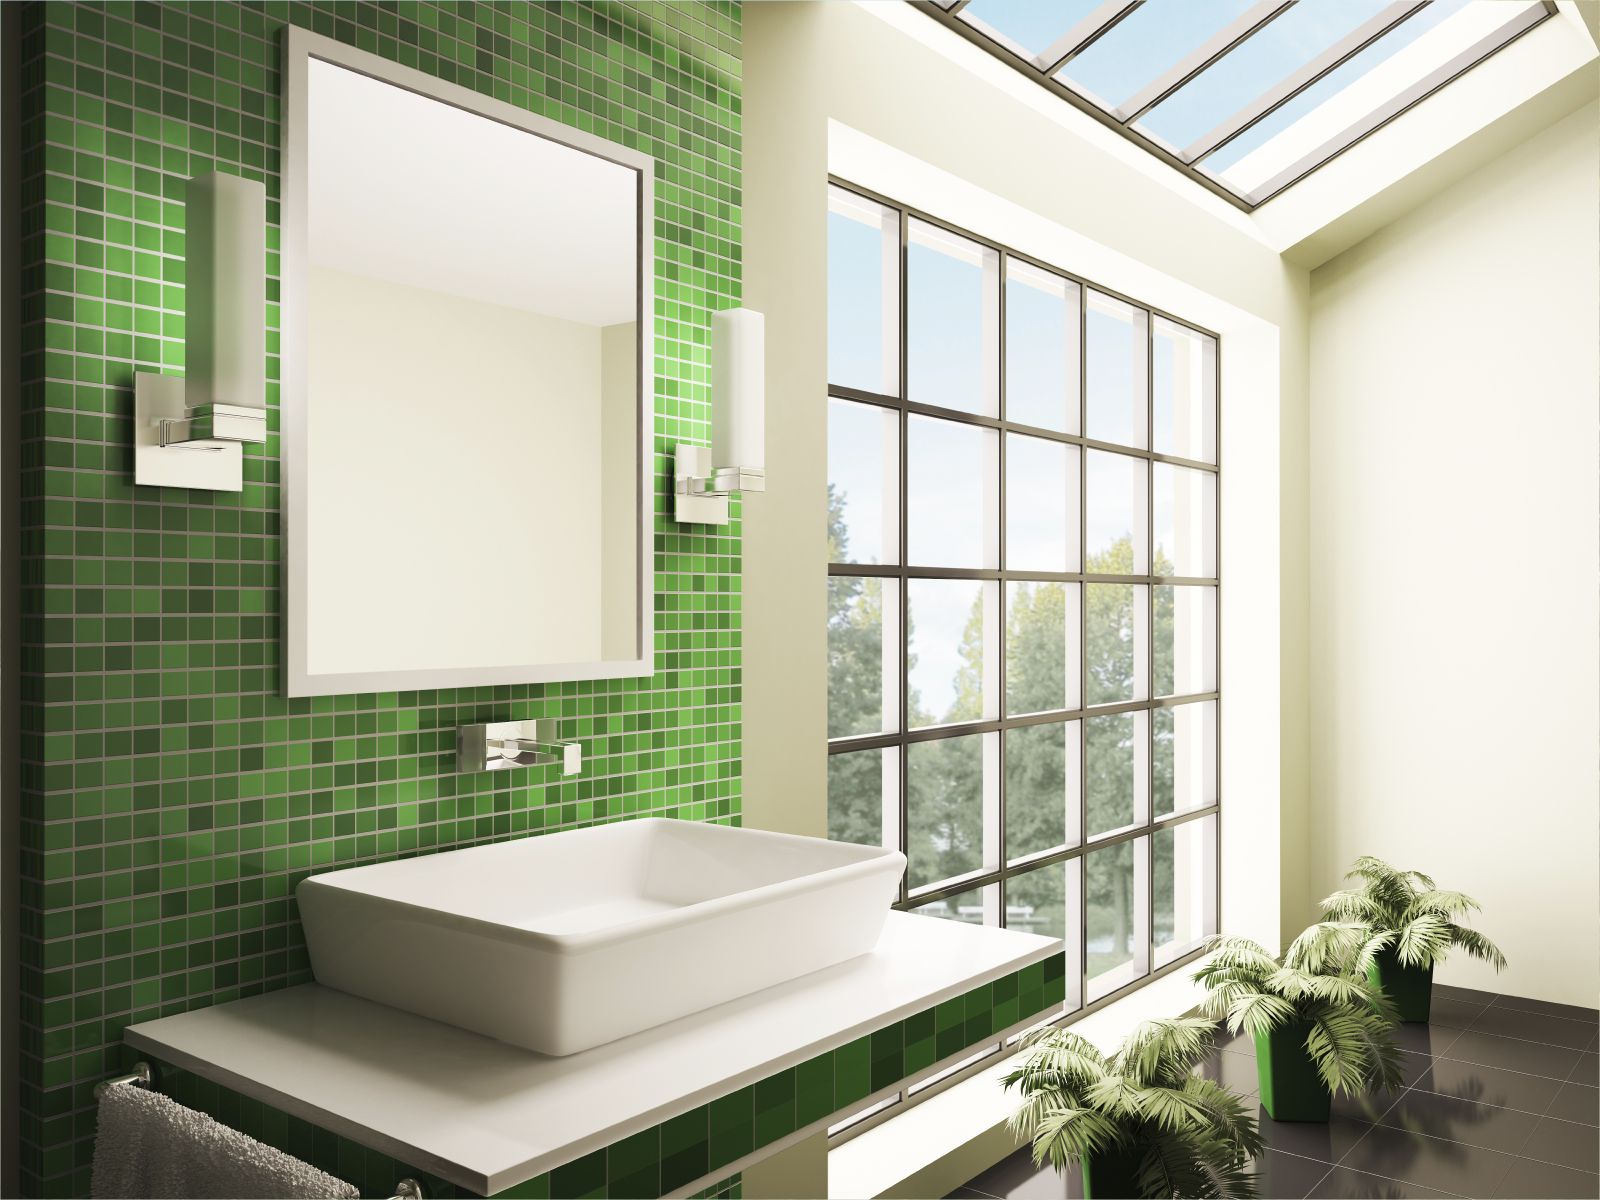 Bathroom Wall Tile Ideas: 10 Inspiring Looks For Your Space